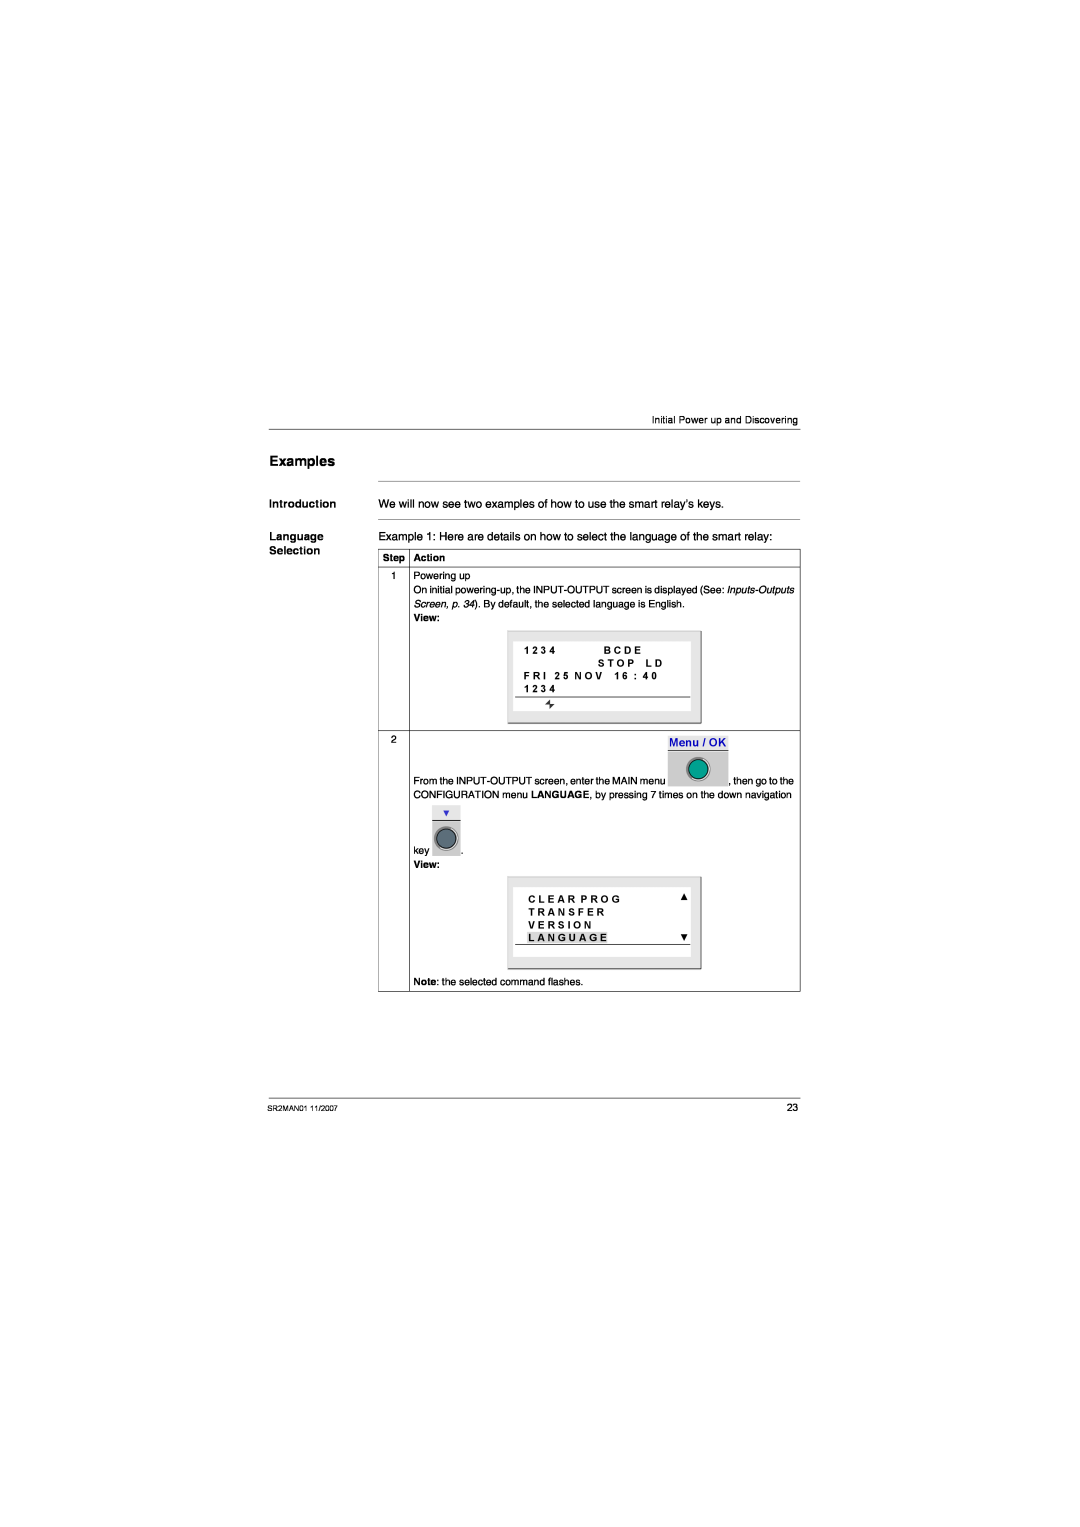 Schneider Electric SR2MAN01 user manual Examples, Introduction Language Selection, Menu / OK, Step Action, View 